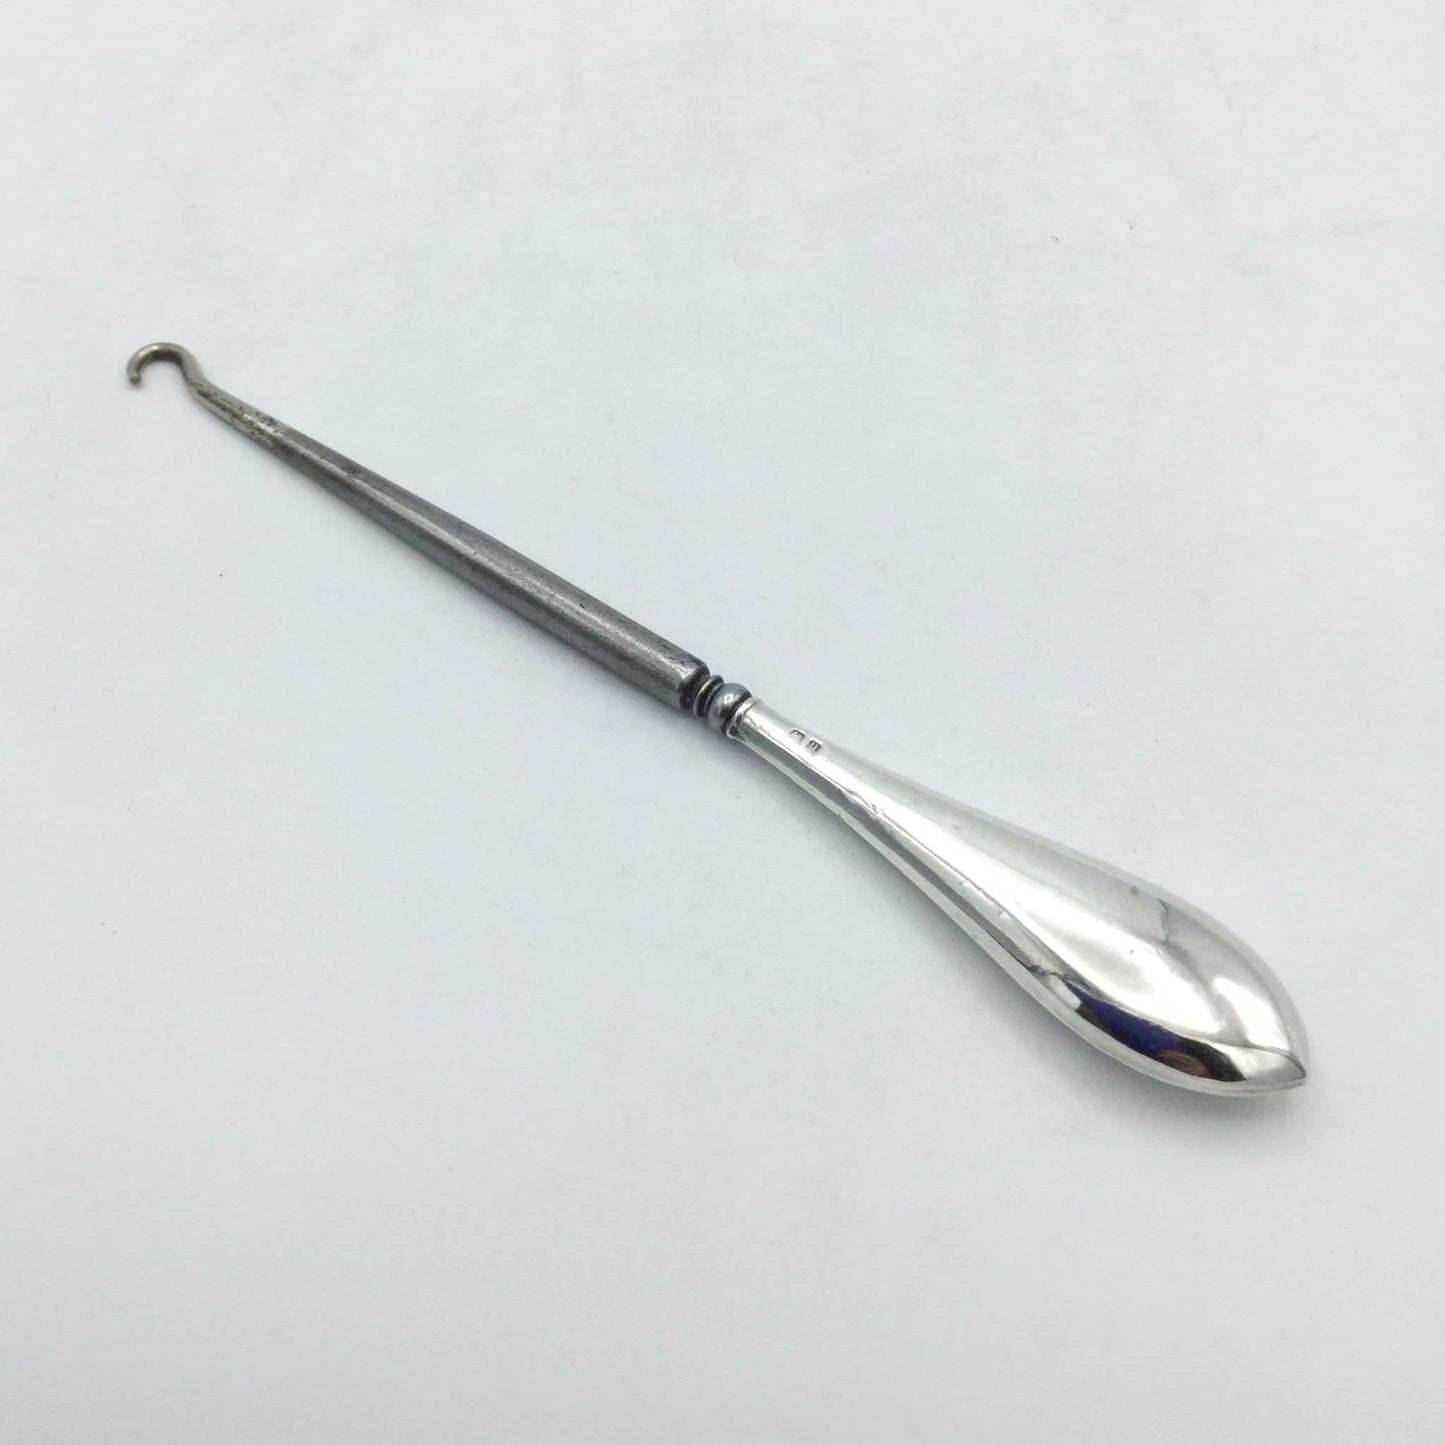 Silver handled button hook with a shiny handle and steel hook on a white background